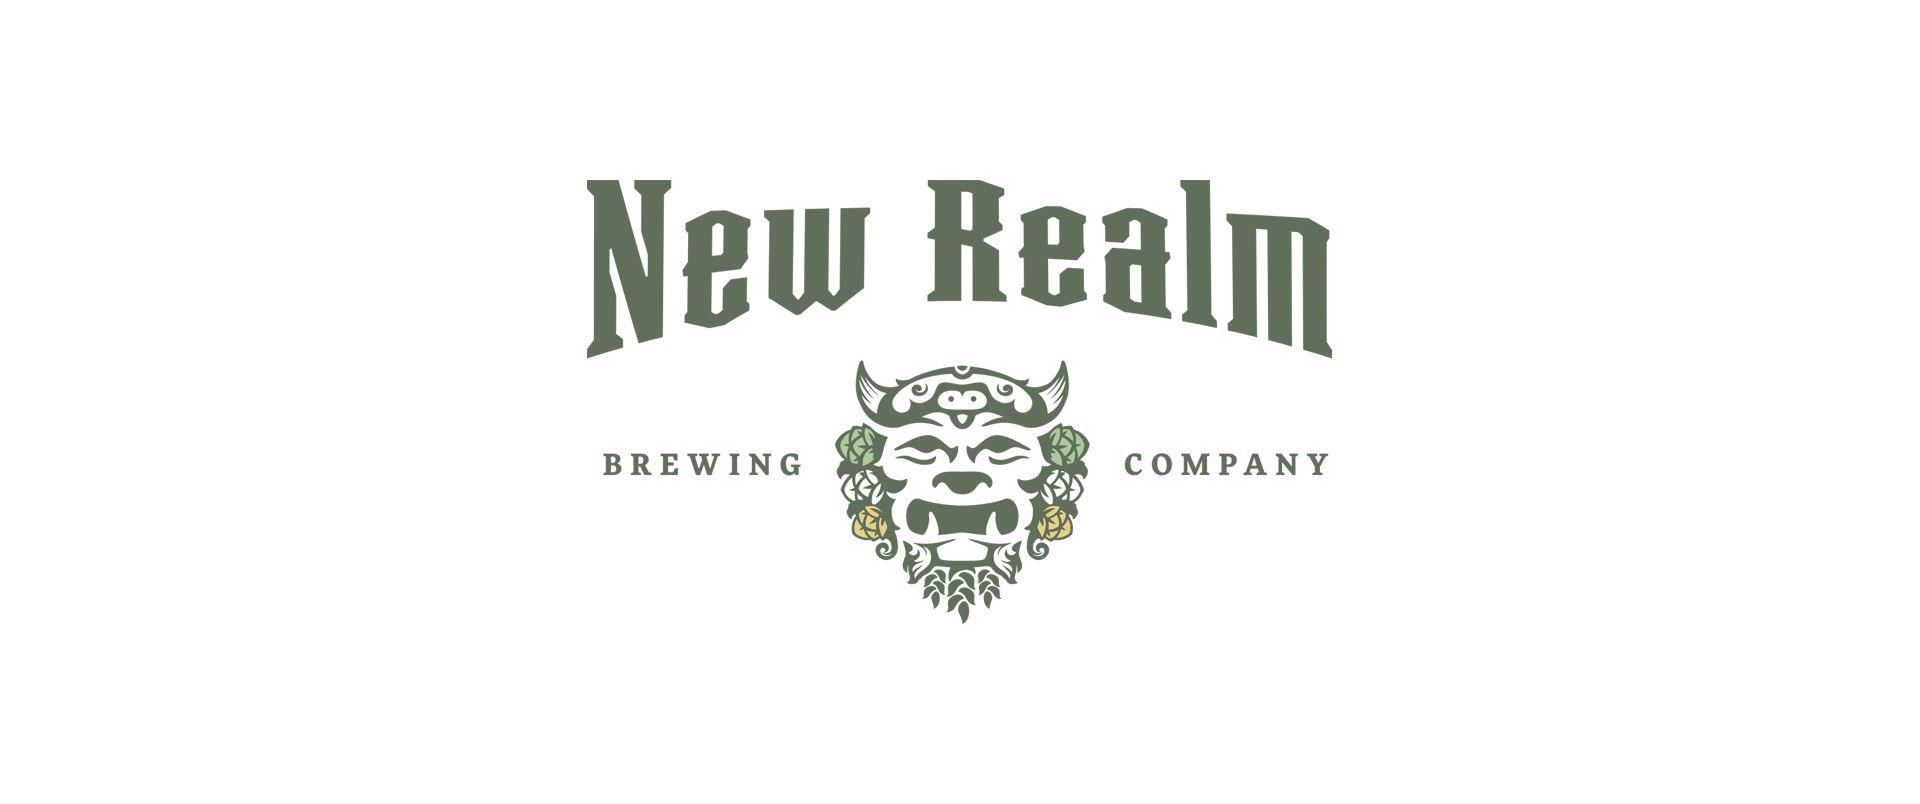 Georgia Beer Logo - New Realm Brewing Co craft beer branding, strategy, and naming